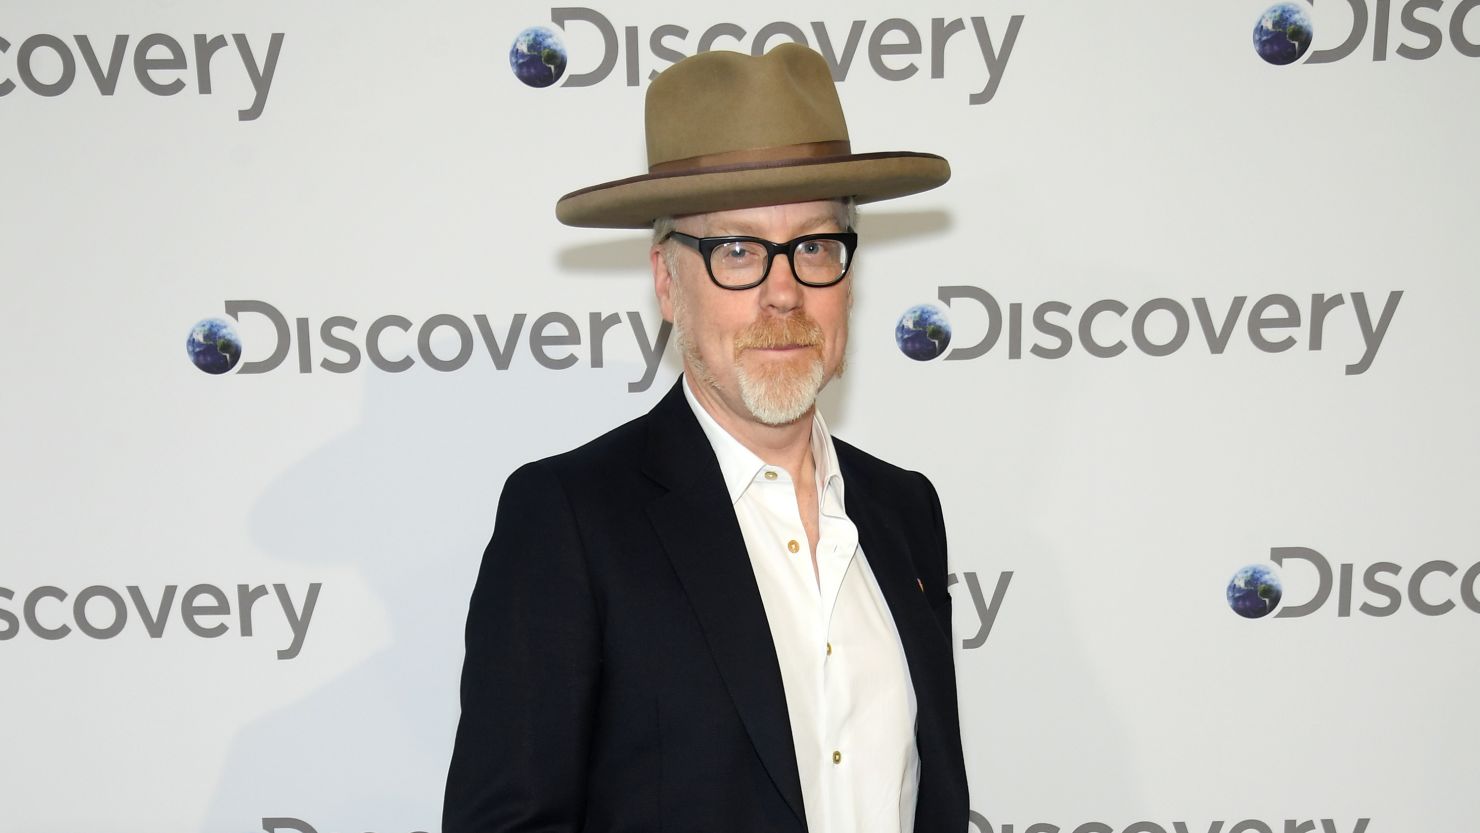 Adam Savage at Lincoln Center on April 10, 2018, in New York City.  